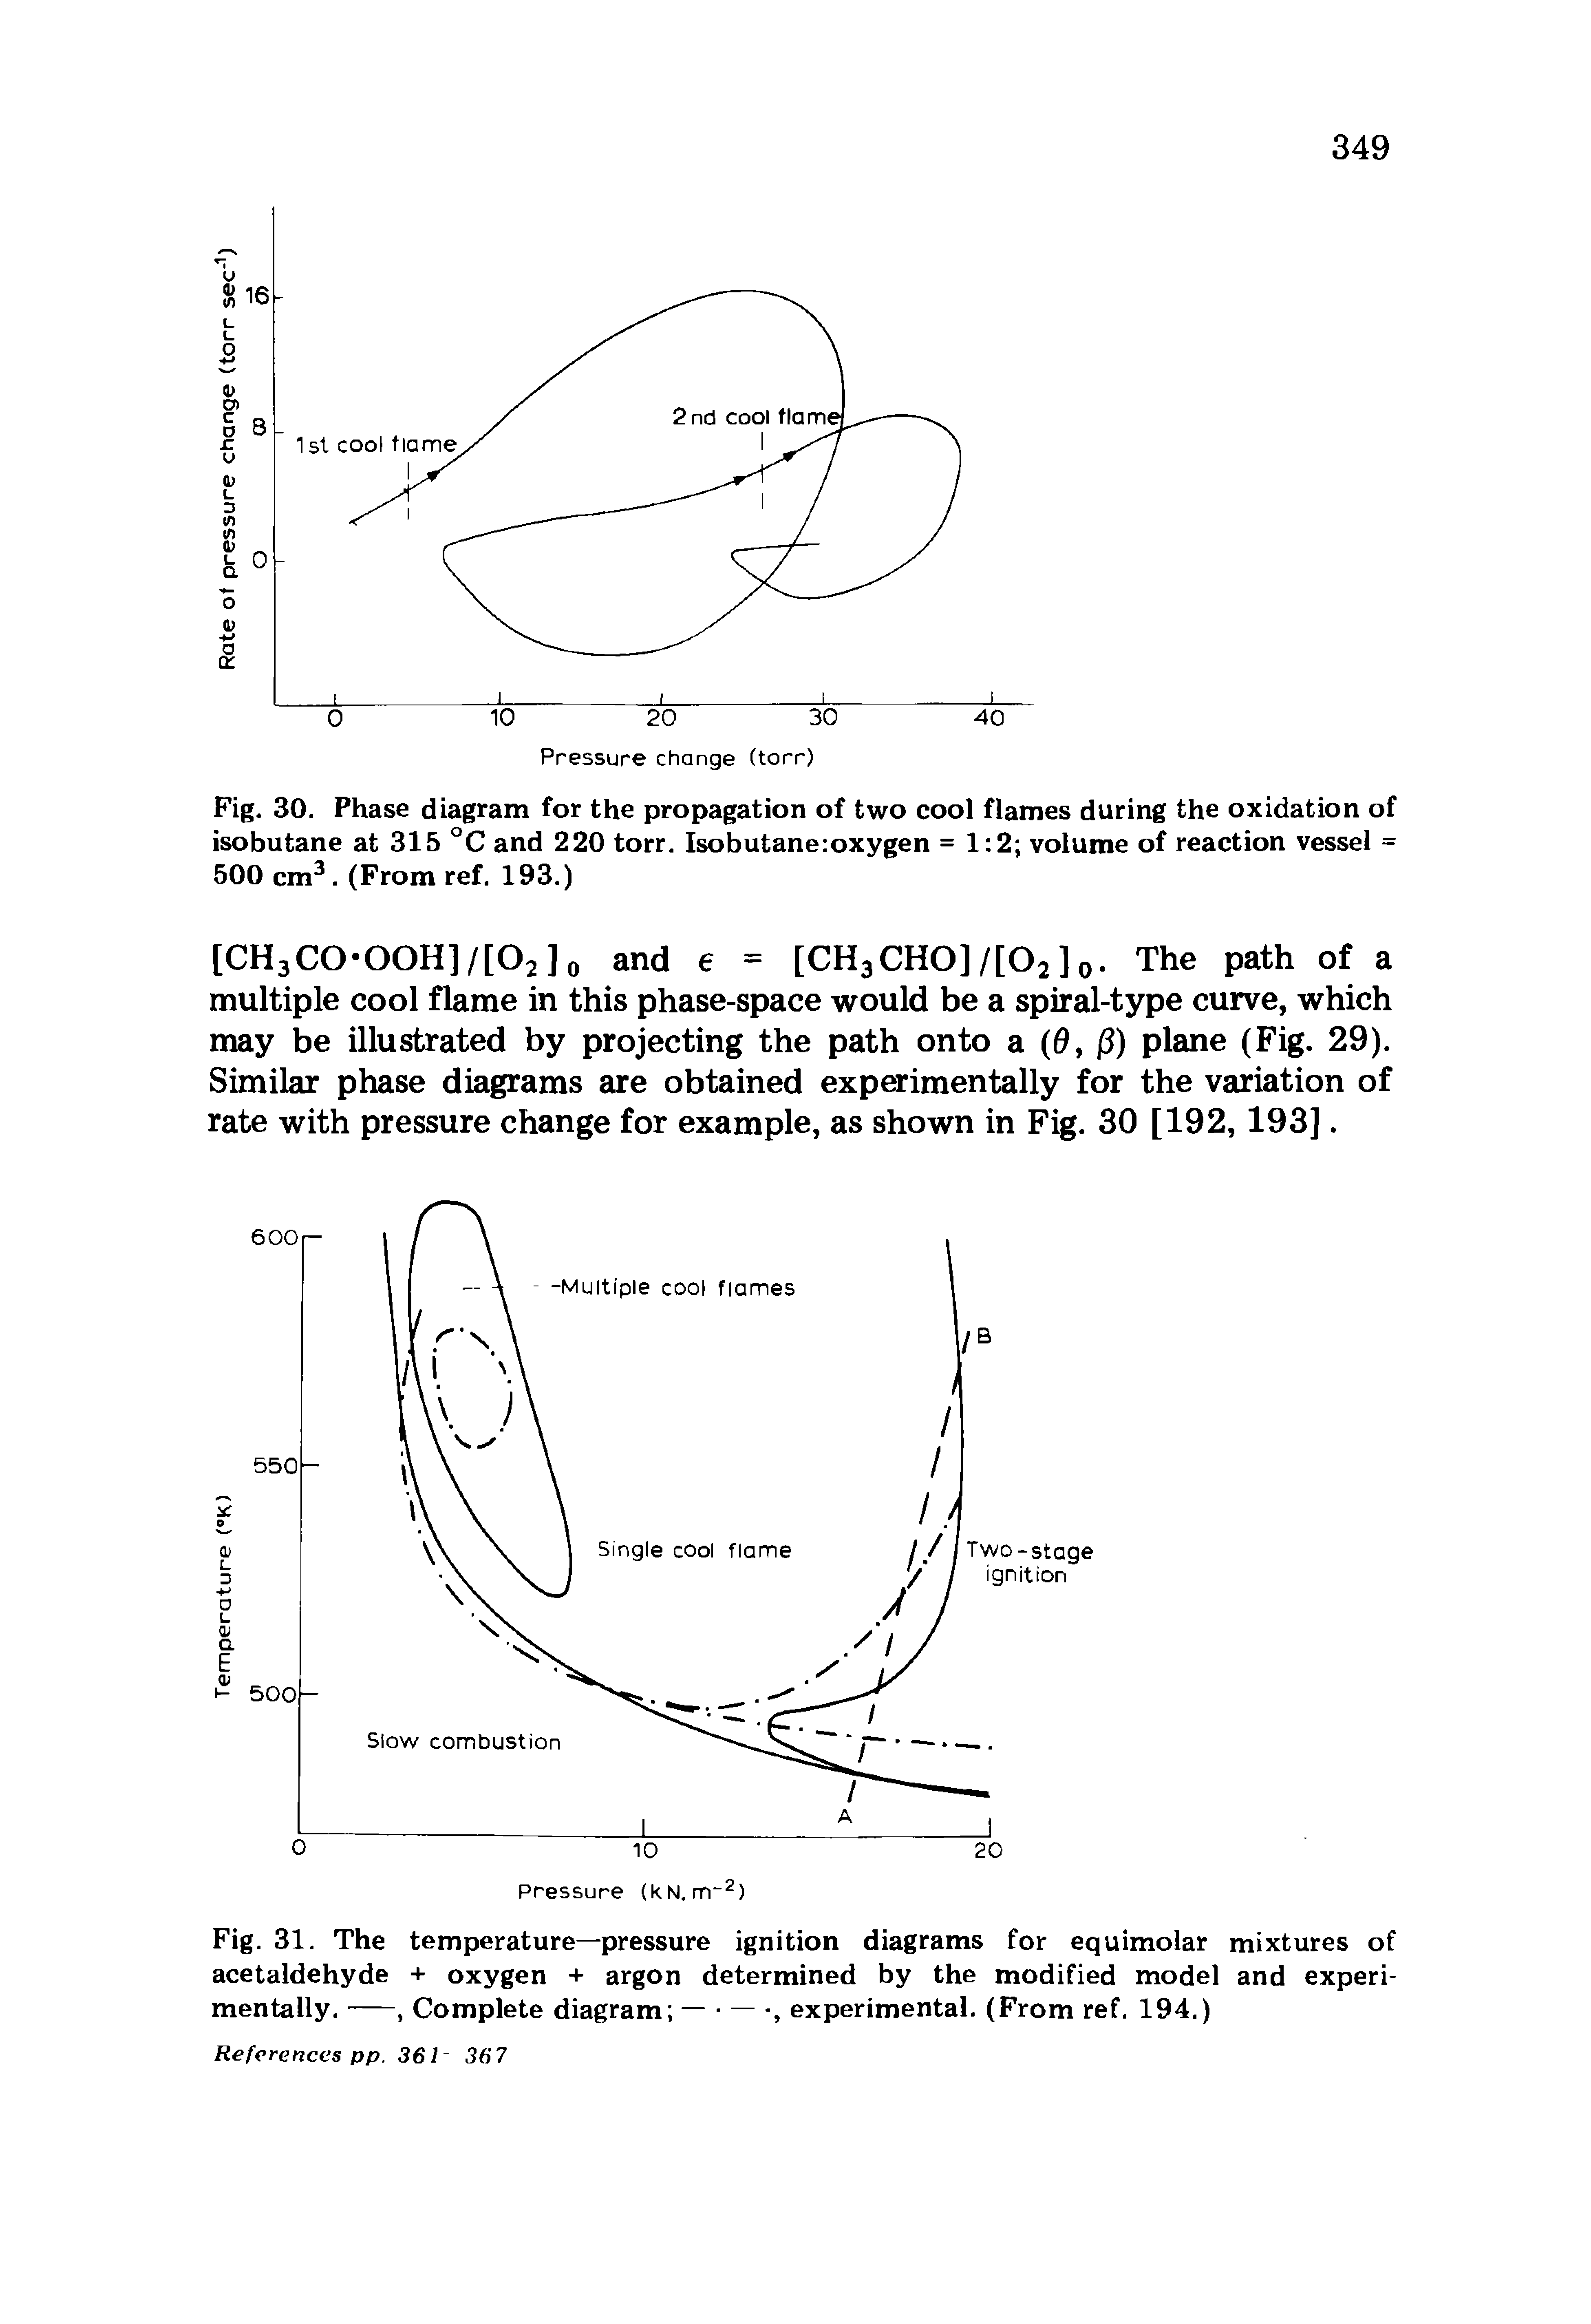 Fig. 31. The temperature—pressure ignition diagrams for equimolar mixtures of acetaldehyde + oxygen + argon determined by the modified model and experimentally. ---, Complete diagram — — experimental. (From ref. 194.)...